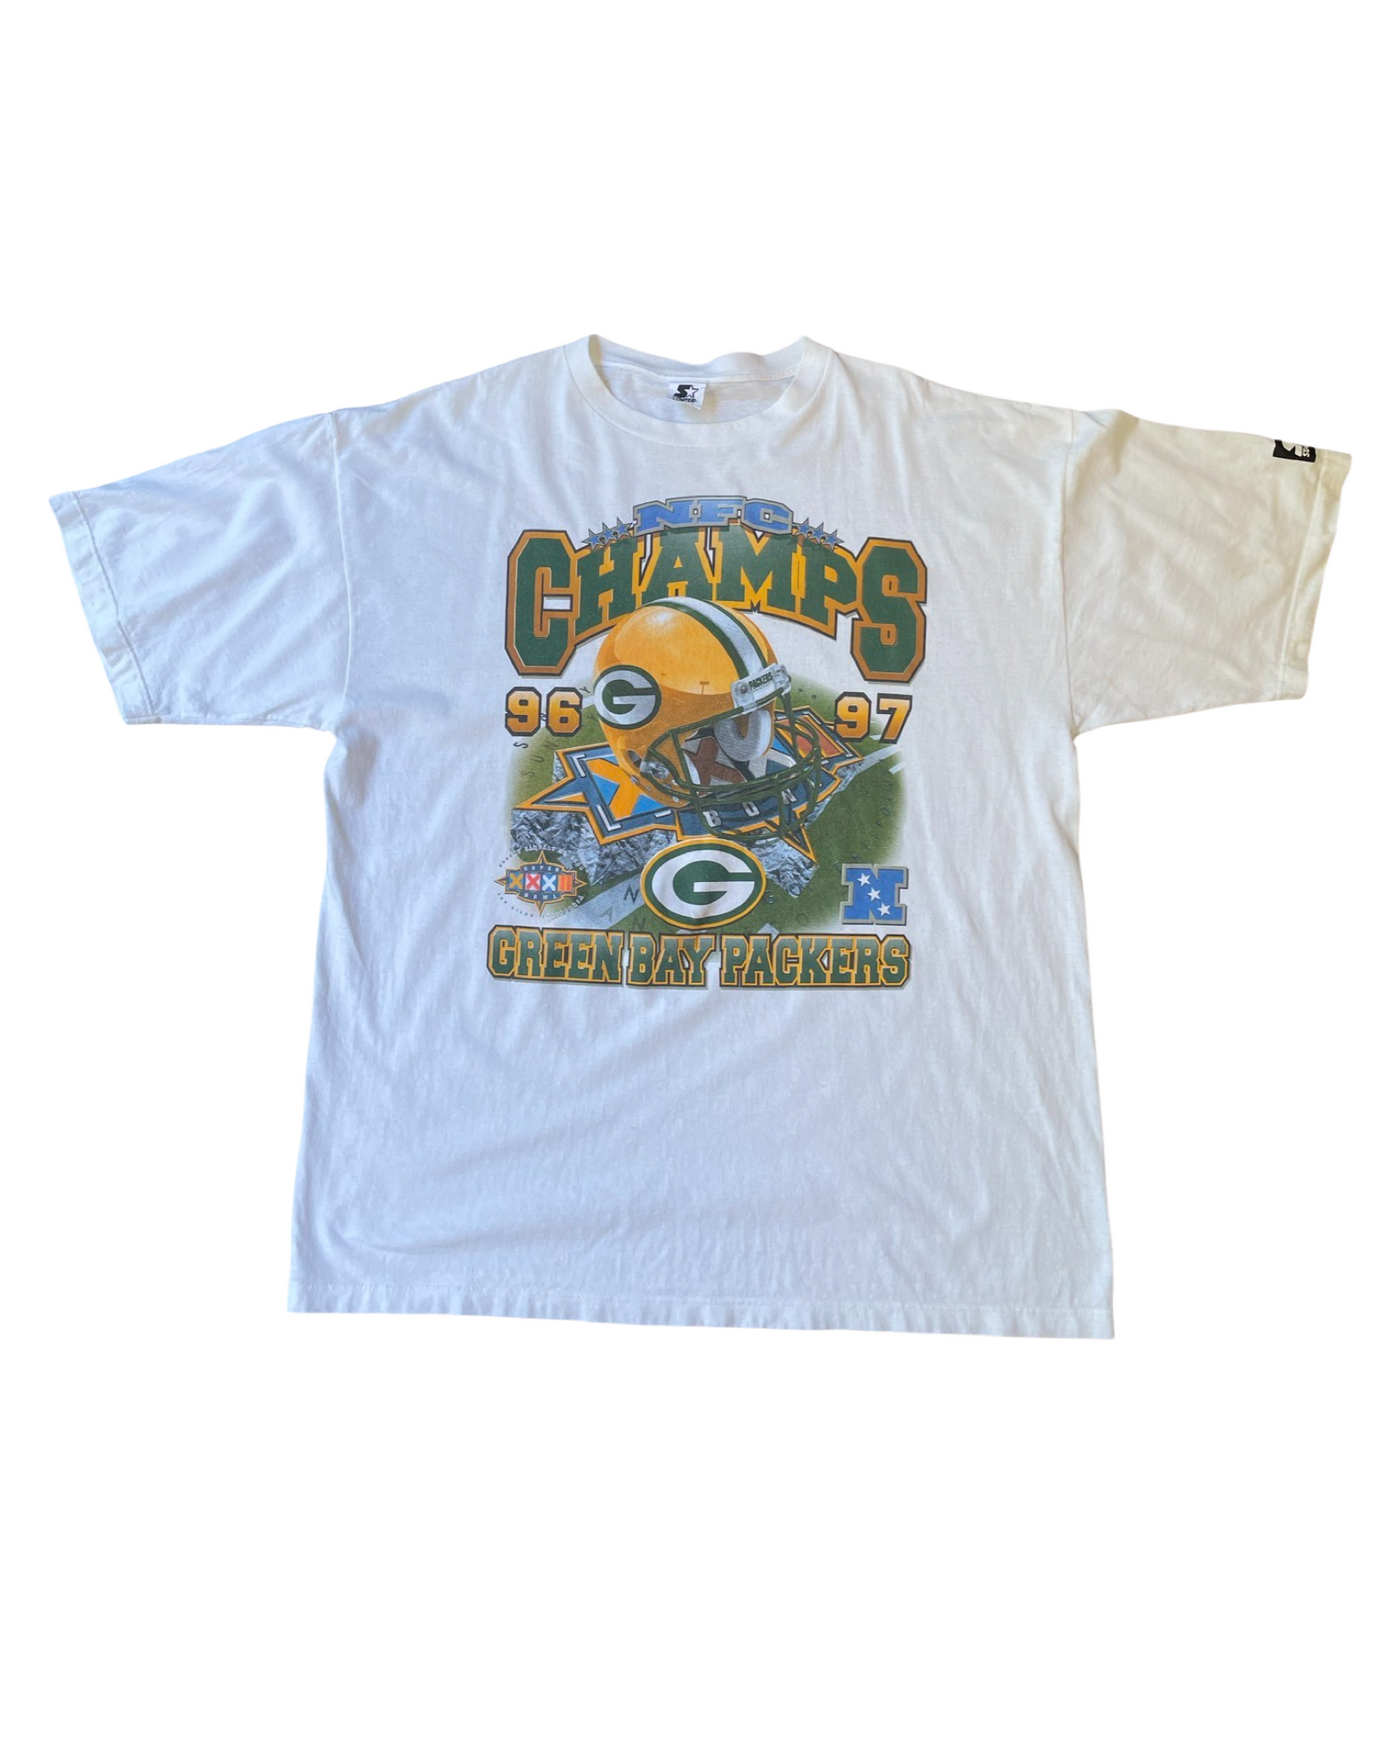 Vintage NFL Green Bay Packers 96 to 97 Super-bowl T -Shirt Size XL